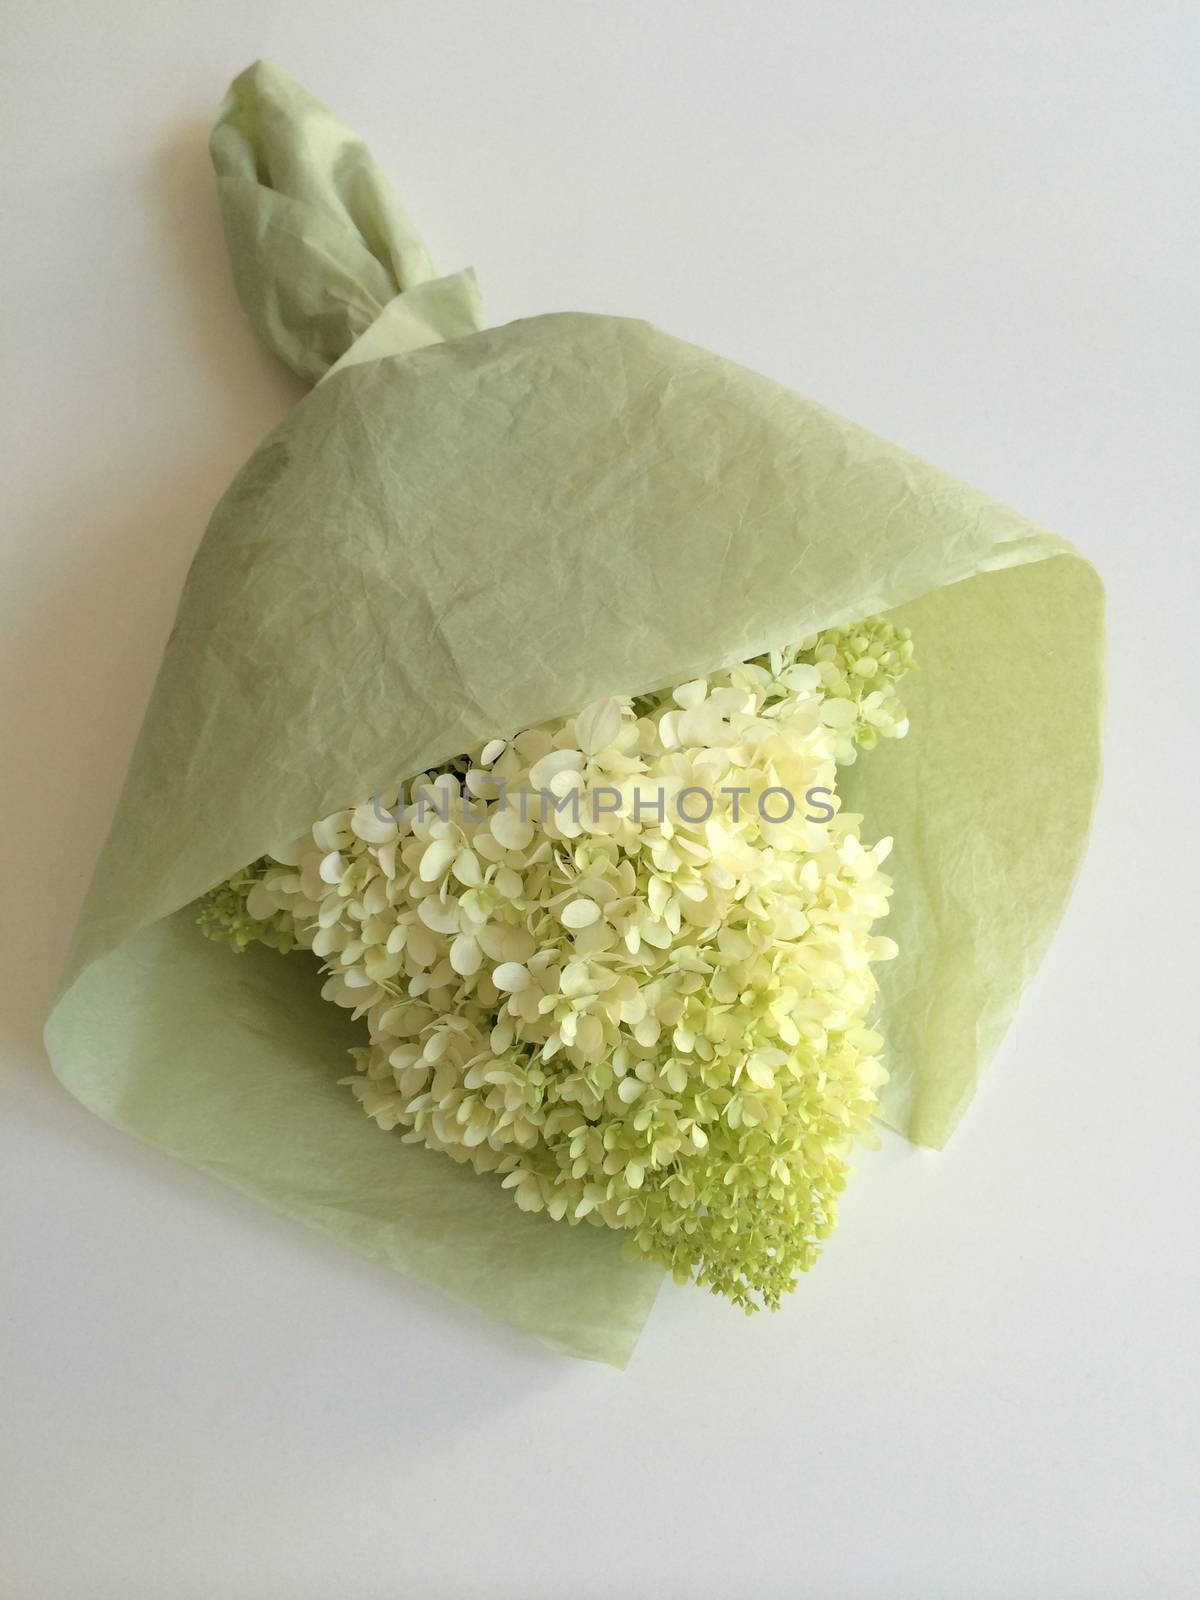 Green and yellow hydrangea flowers in a tissue paper wrappped bouquet